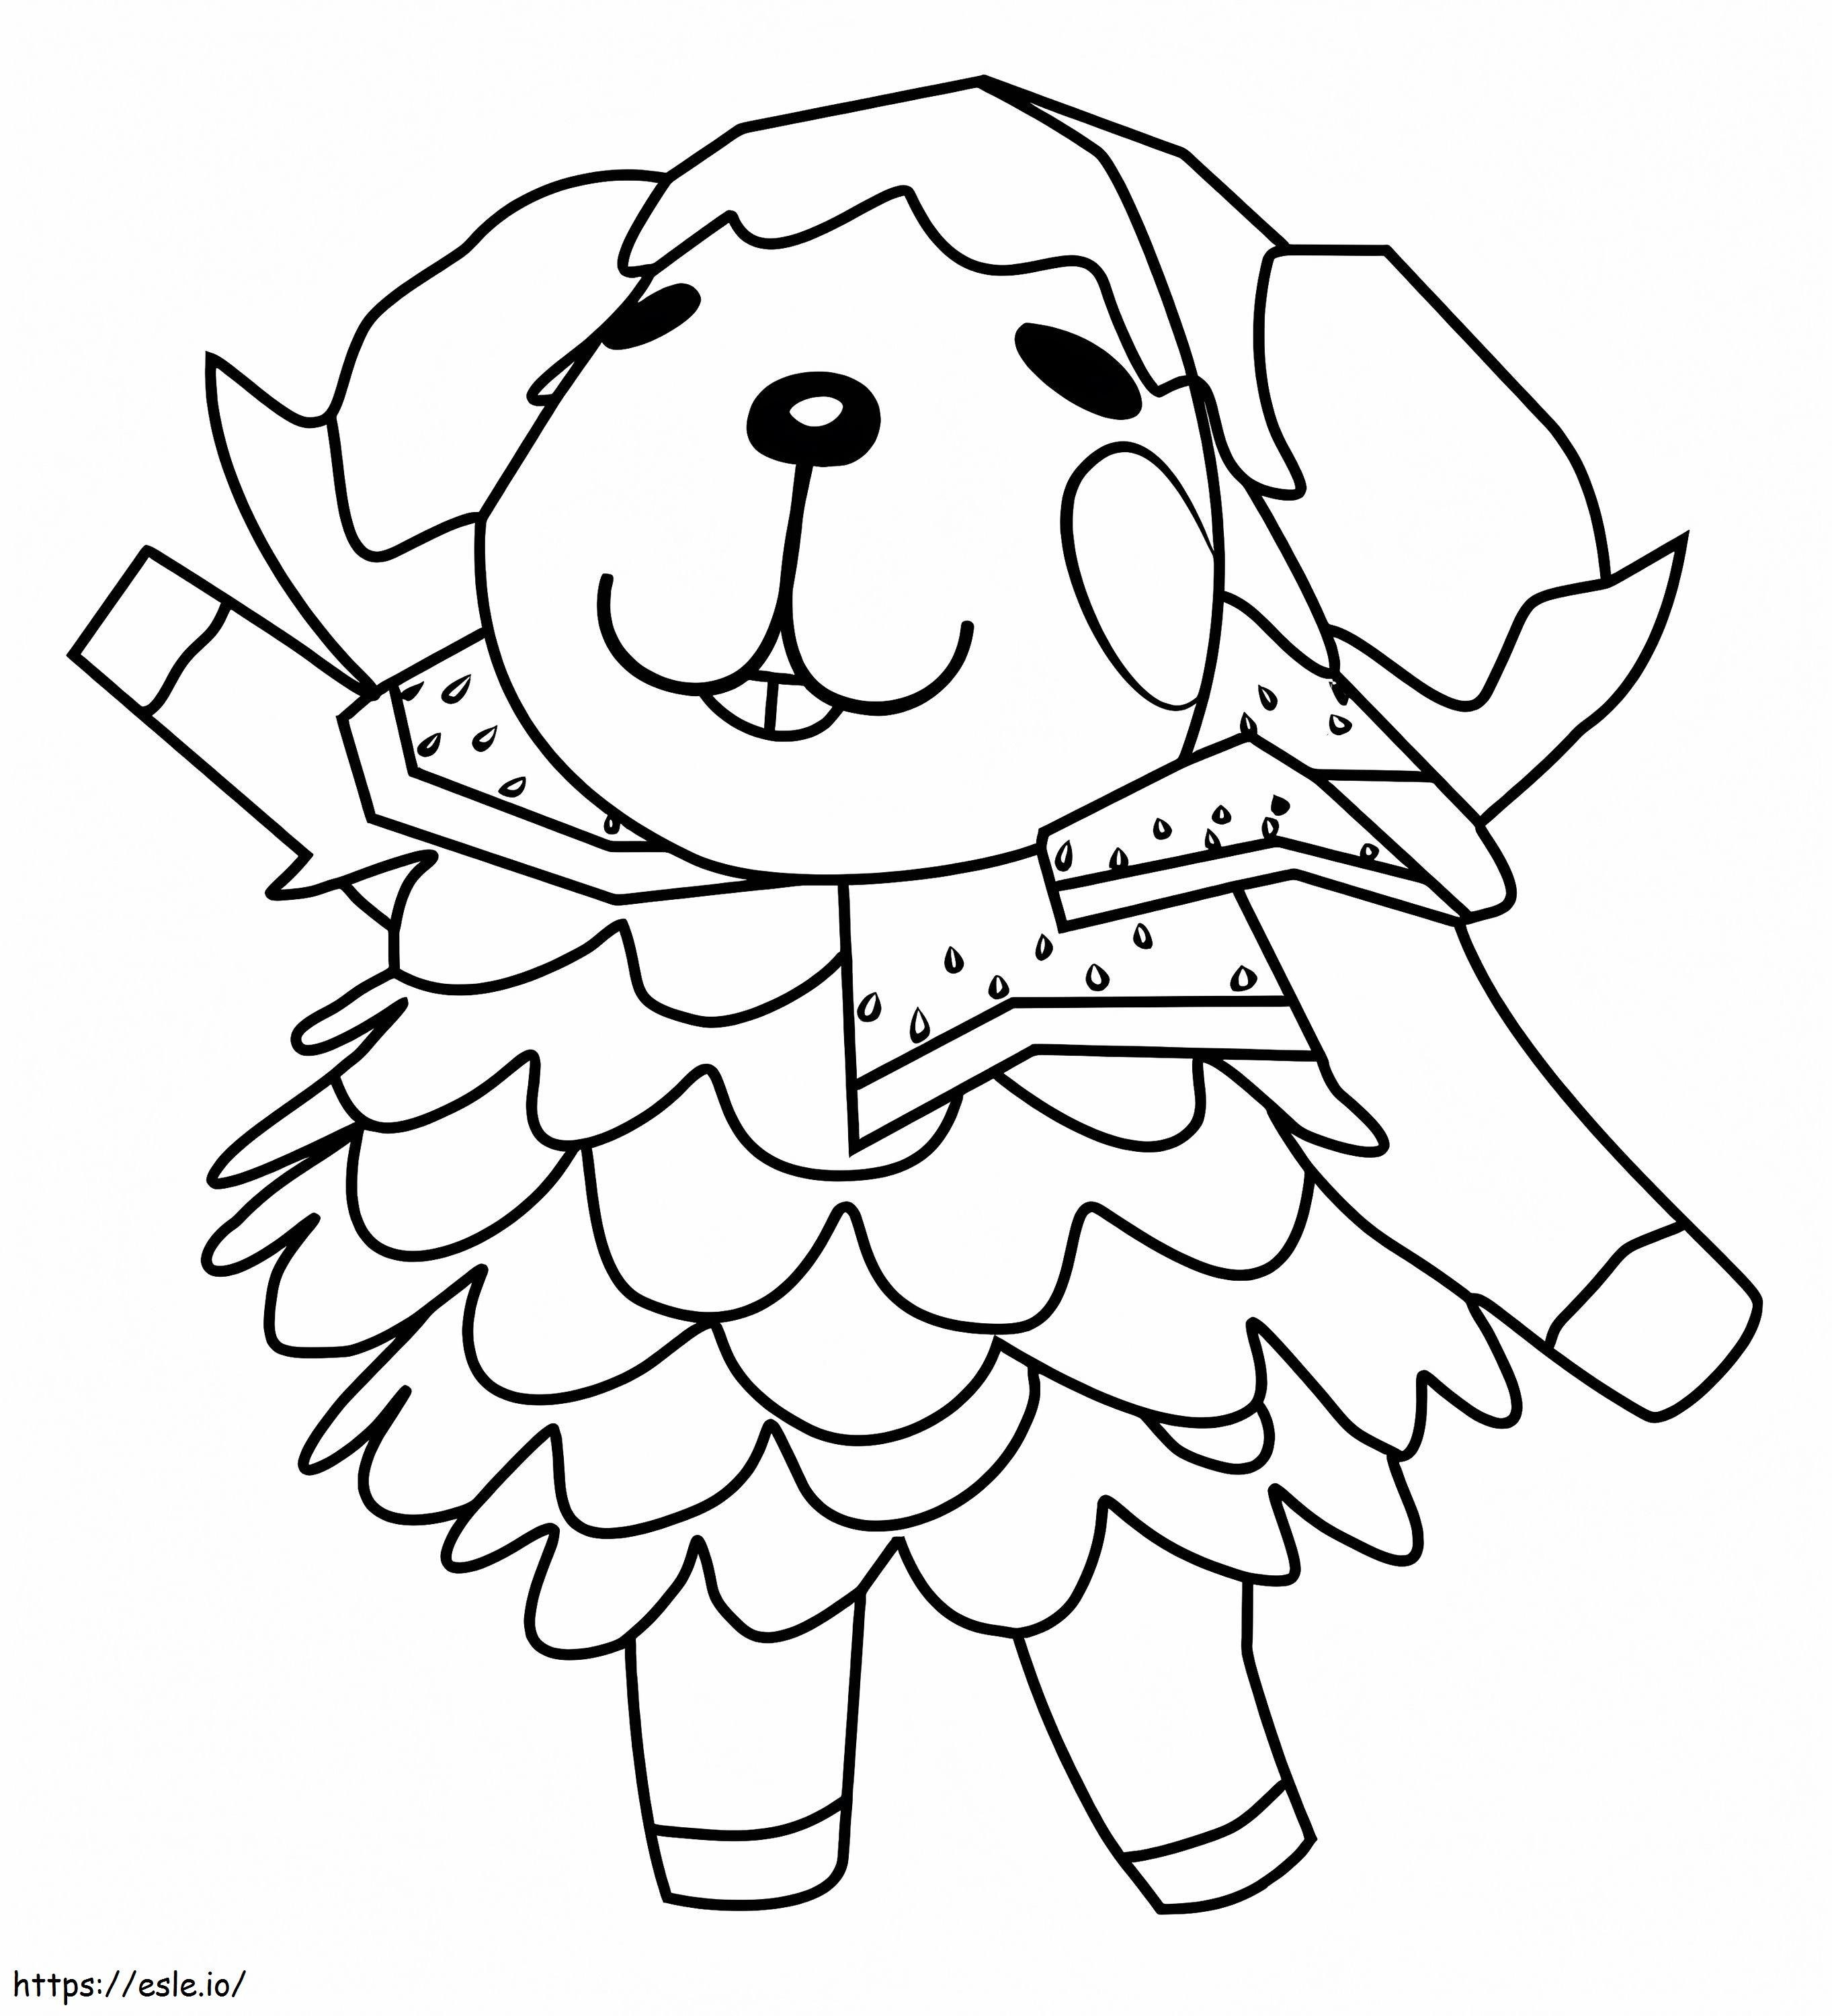 Wendy From Animal Crossing coloring page